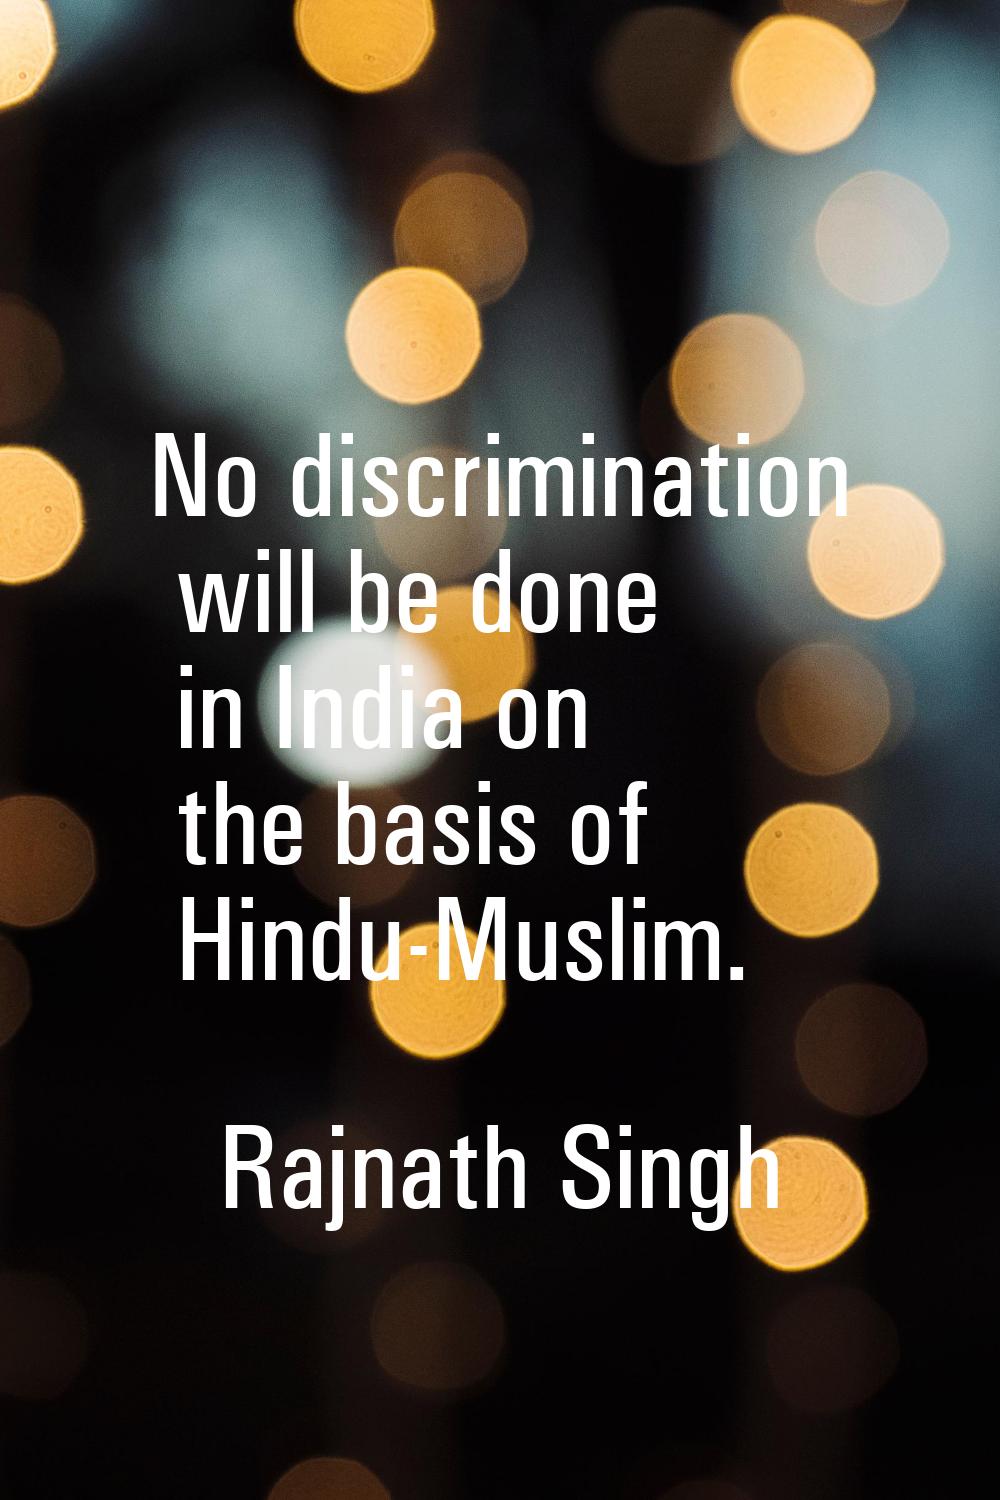 No discrimination will be done in India on the basis of Hindu-Muslim.